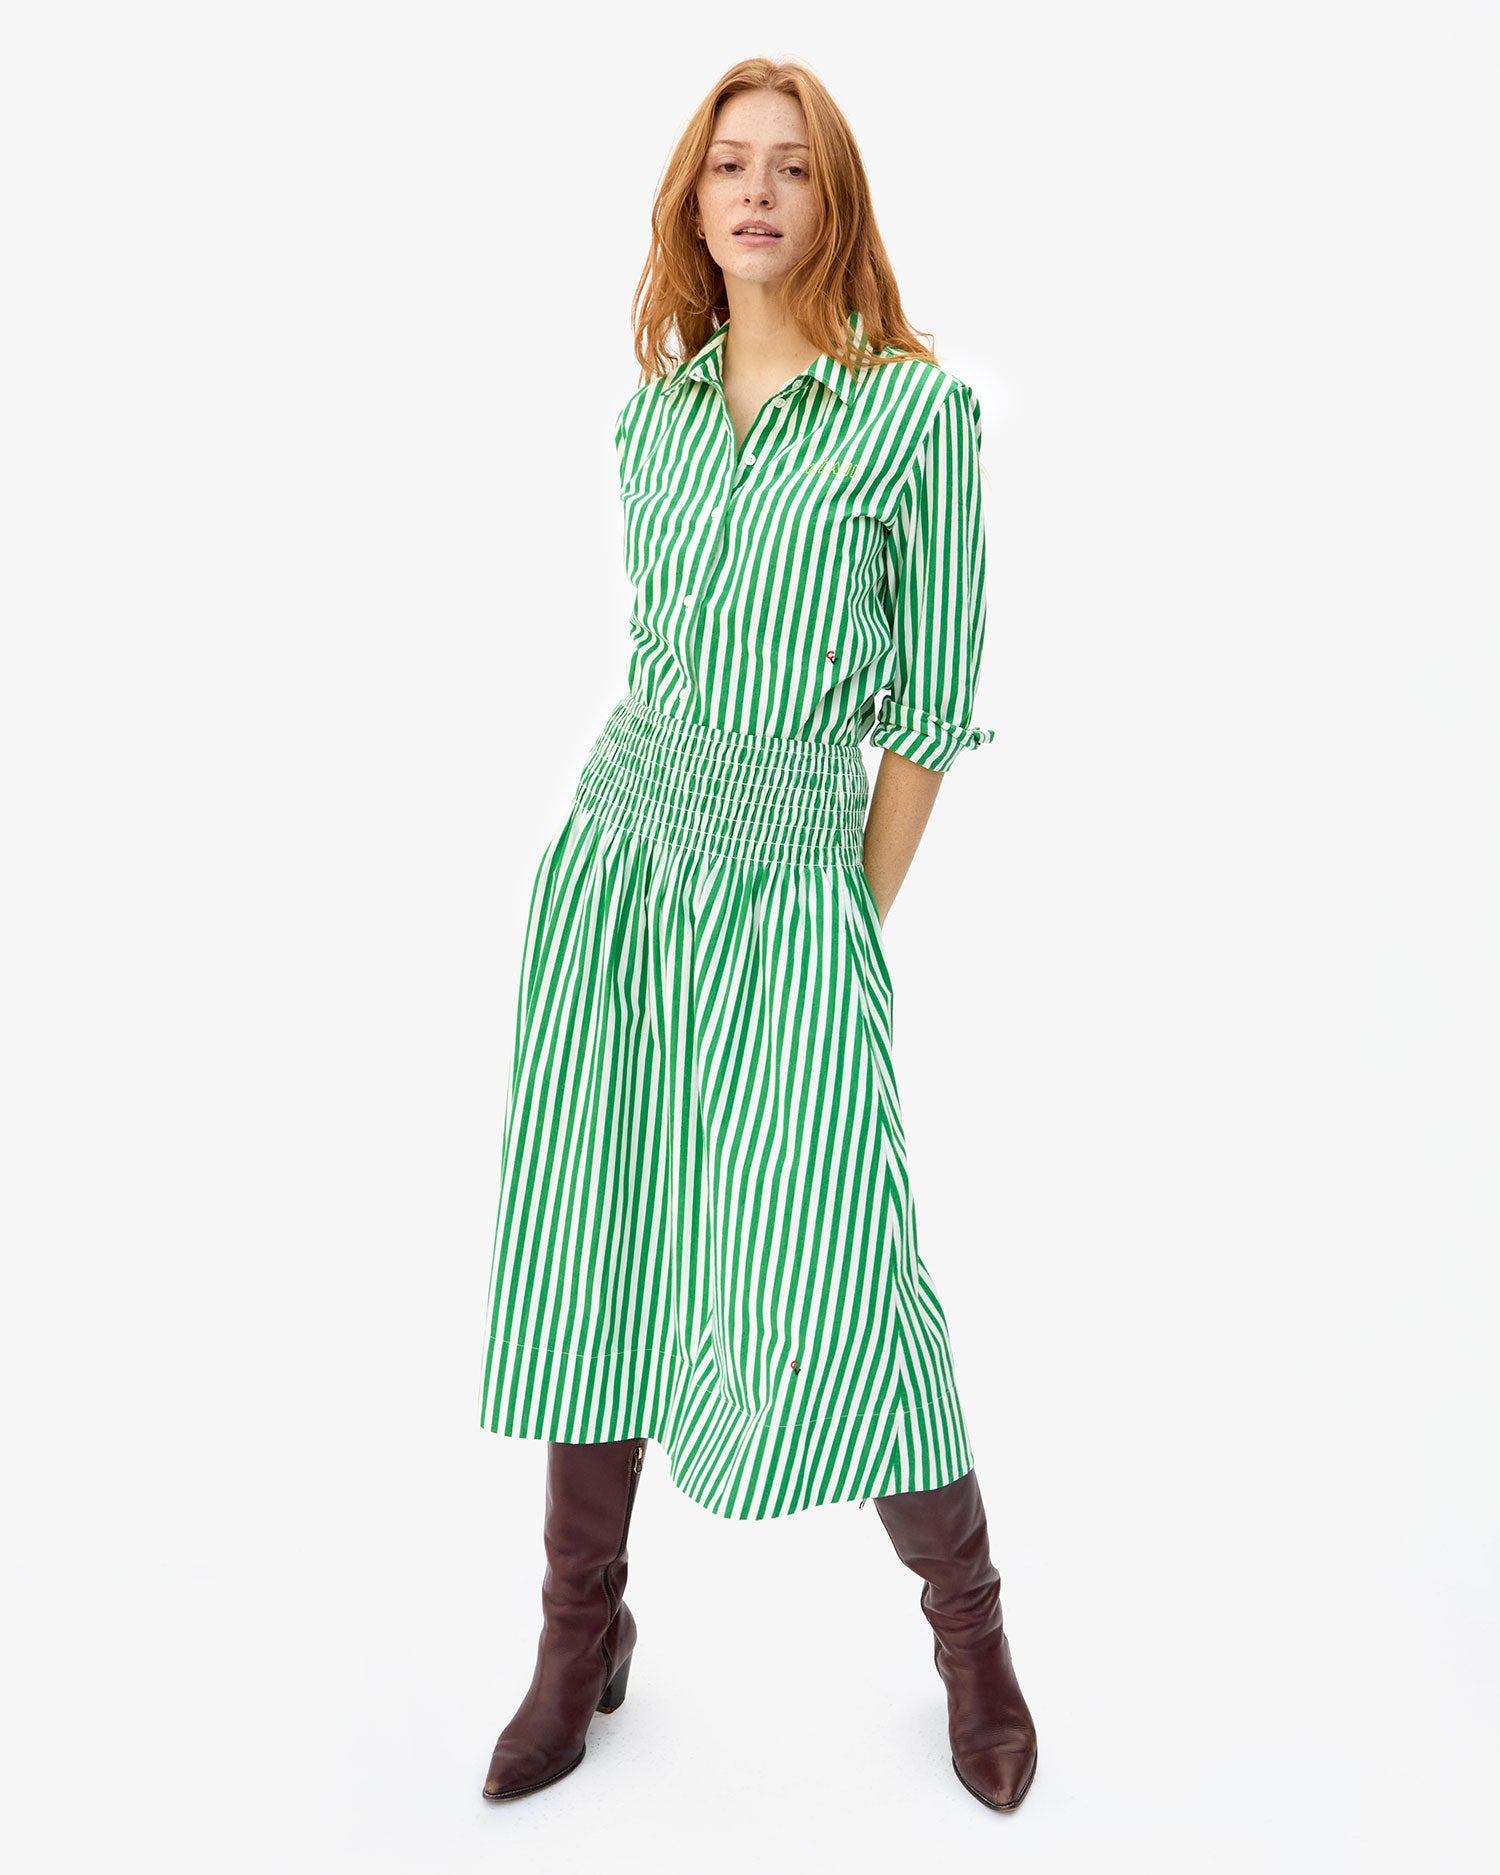 haley with her hands behind her waist. shes wearing the Green & Cream Stripe zoe skirt